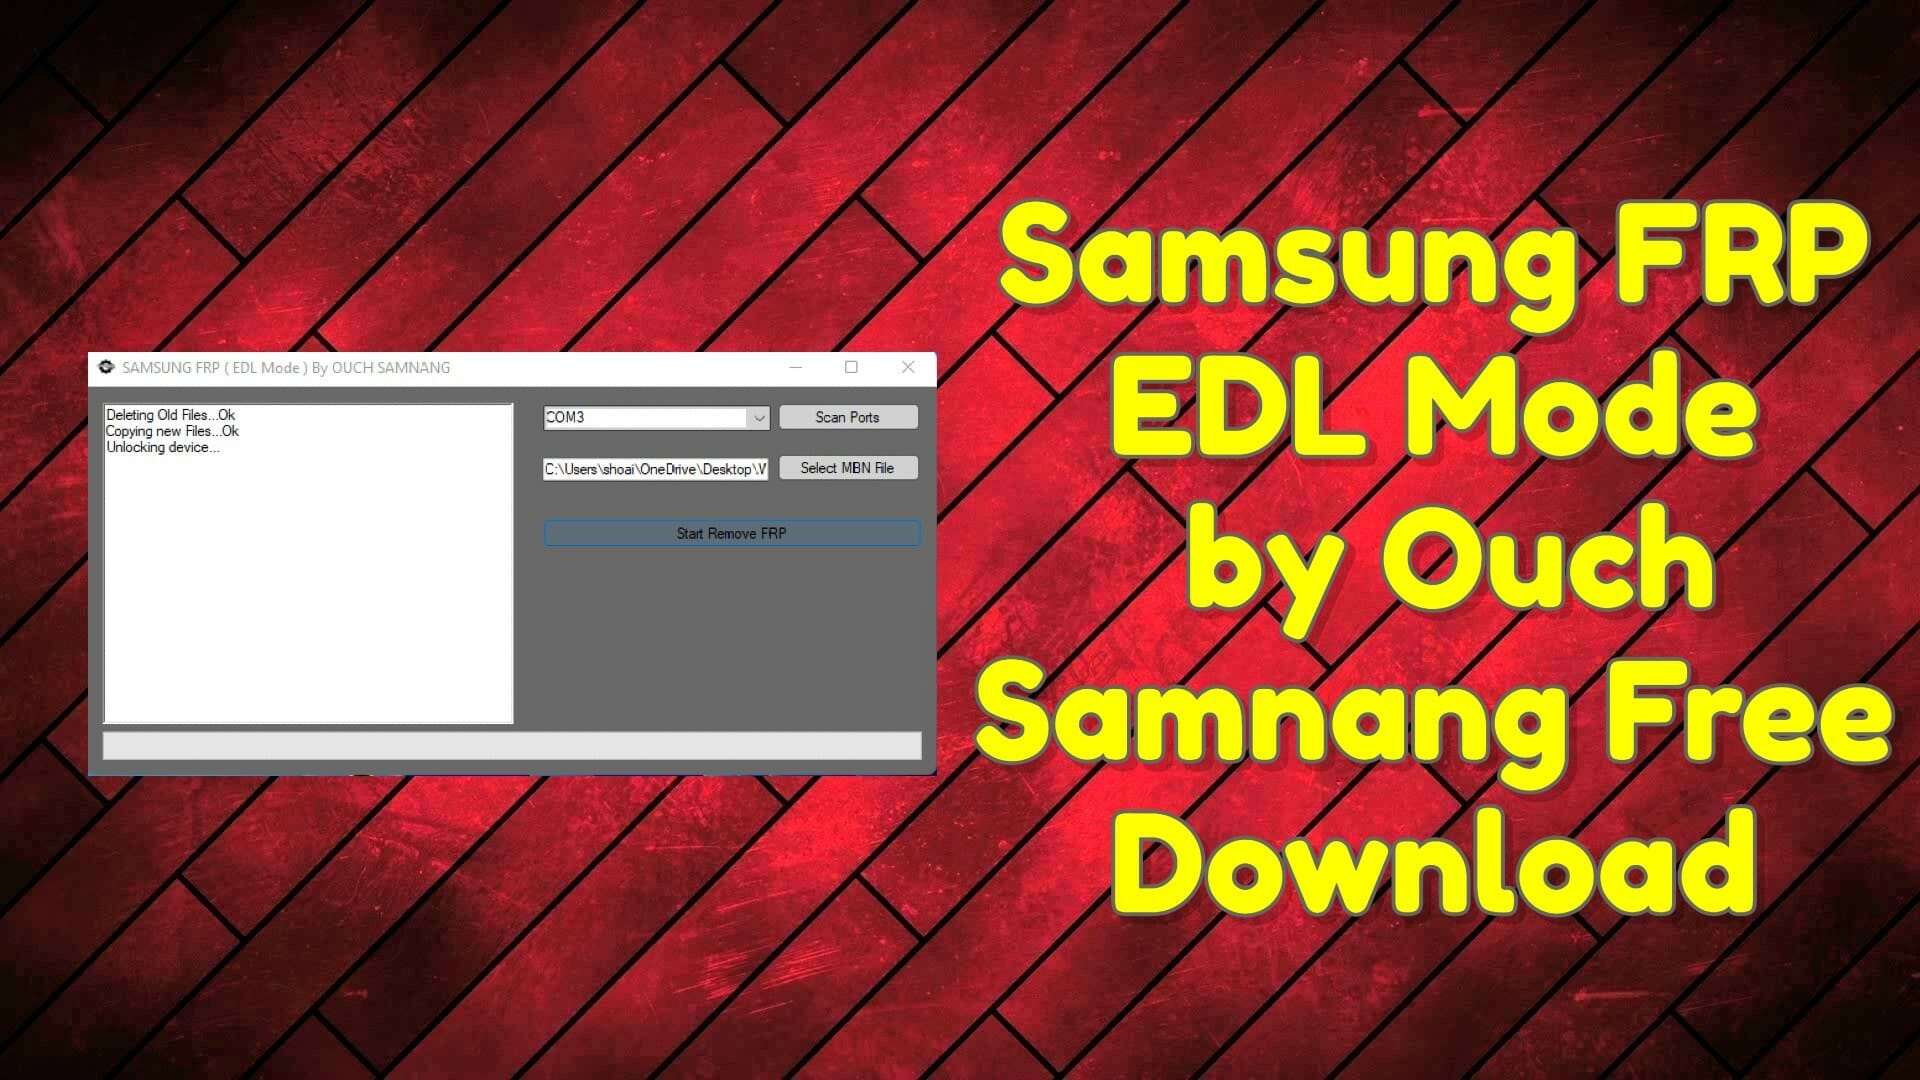 Samsung FRP EDL Mode by Ouch Samnang Free Download